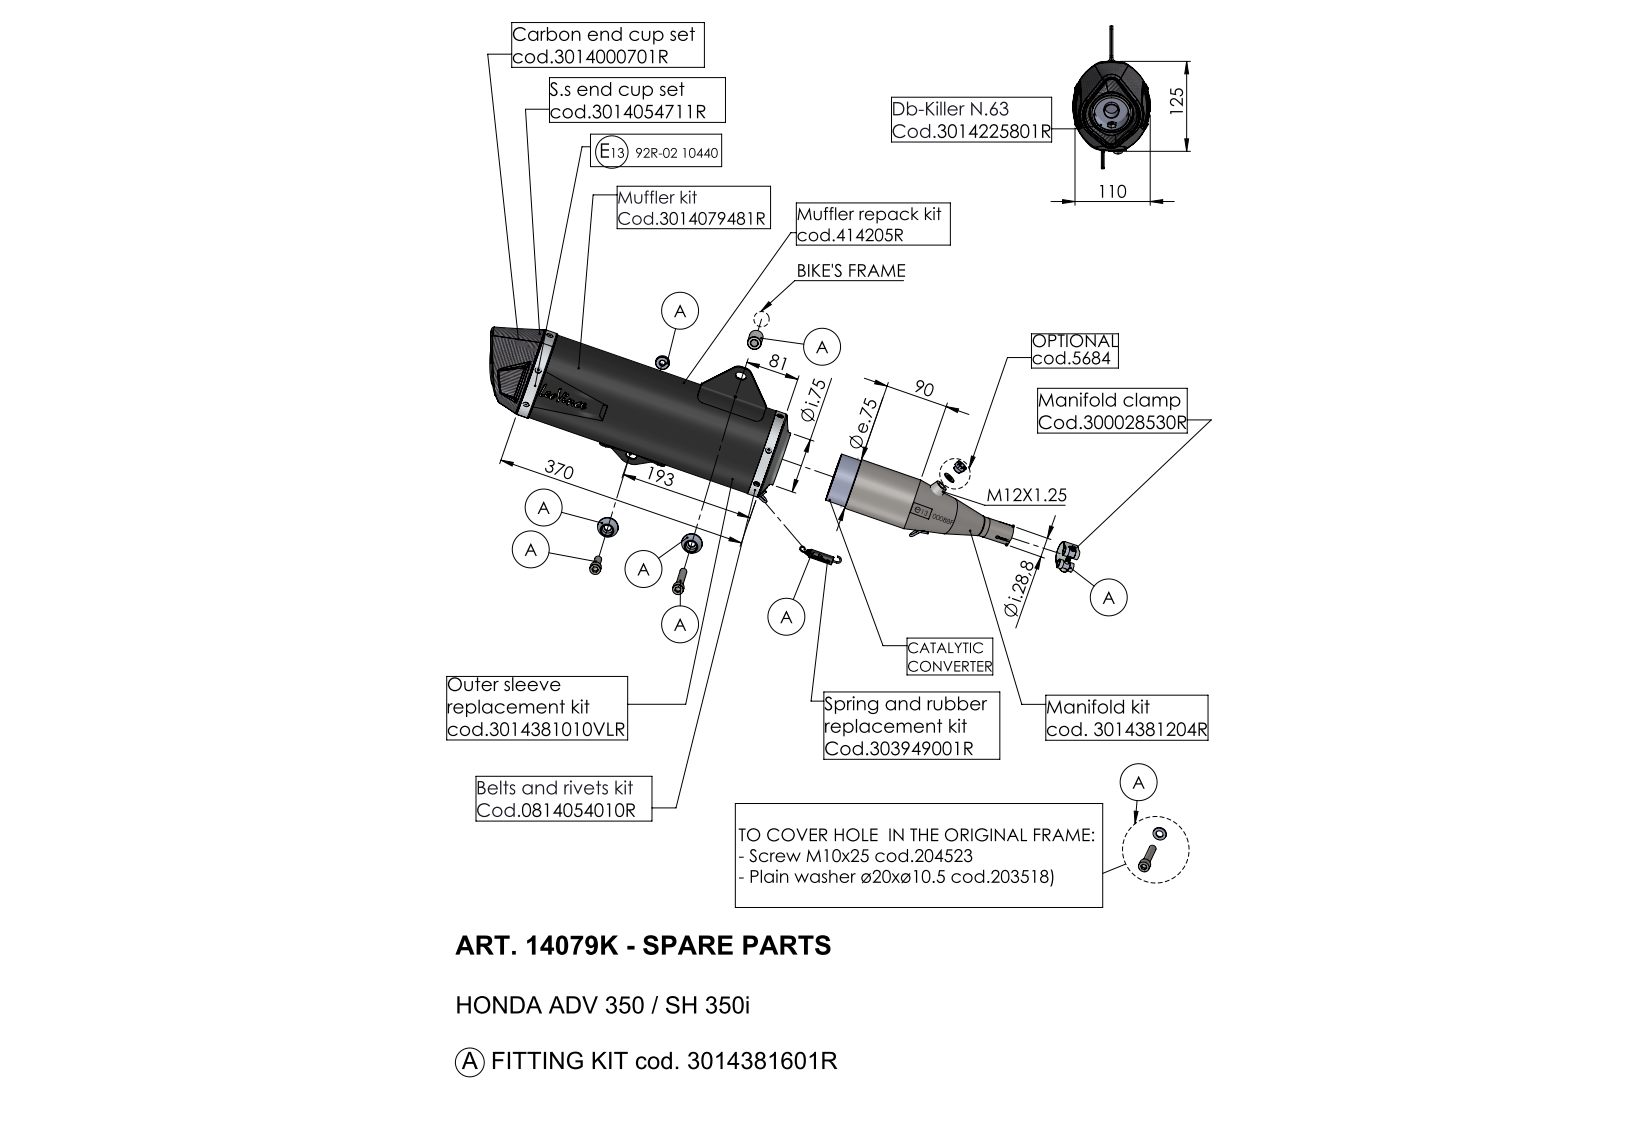 Exploded view Spare parts Leovince 14079K